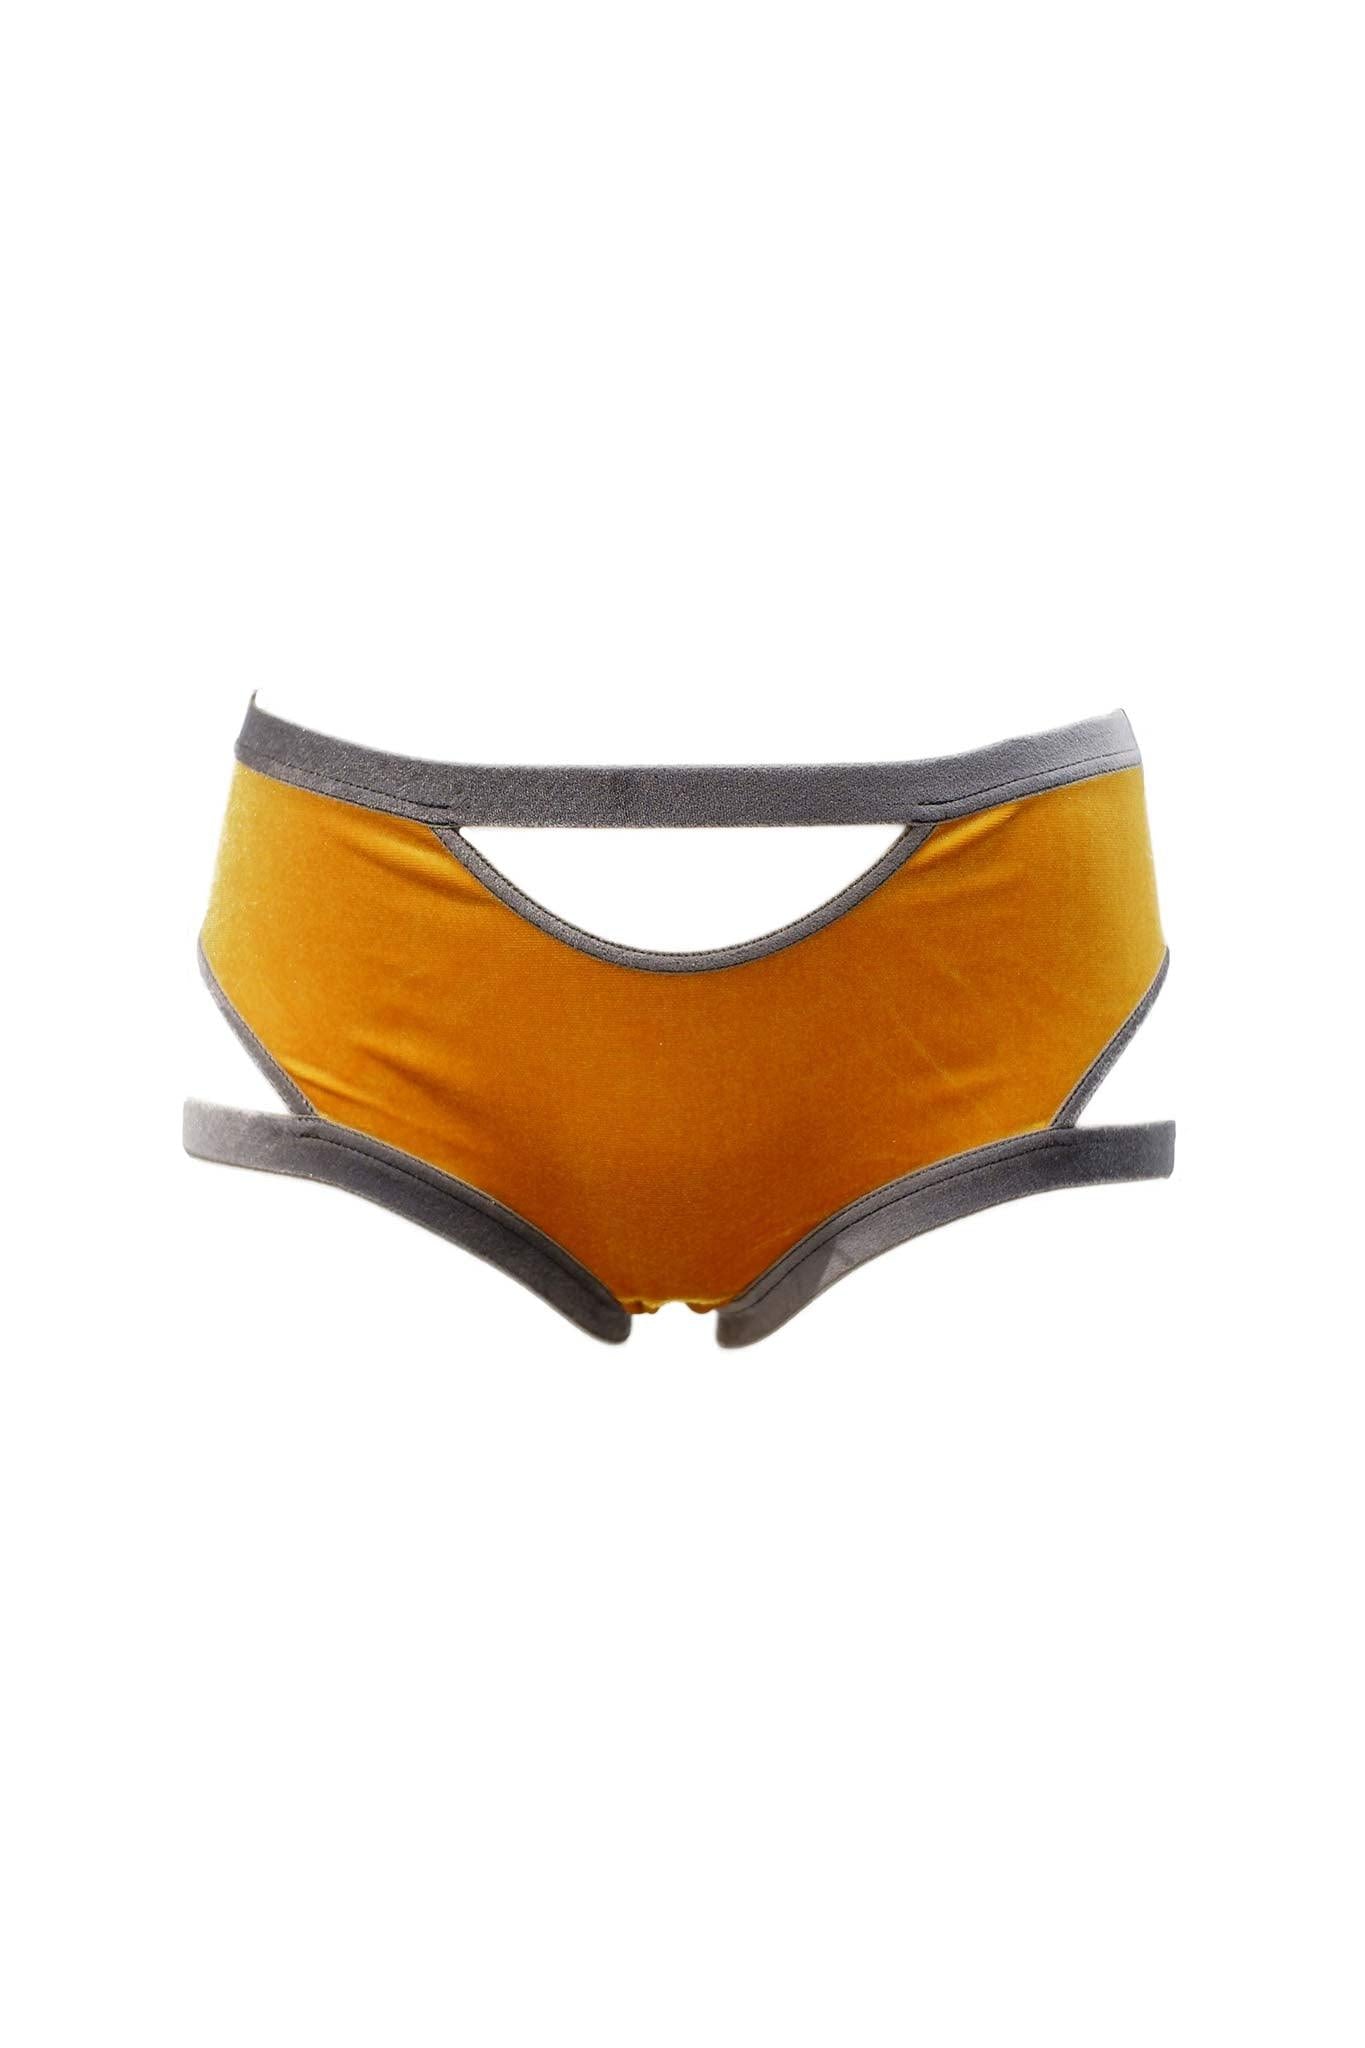 Mustard Yellow Velour Period-Proof Panty • K+1% • Made in Japan